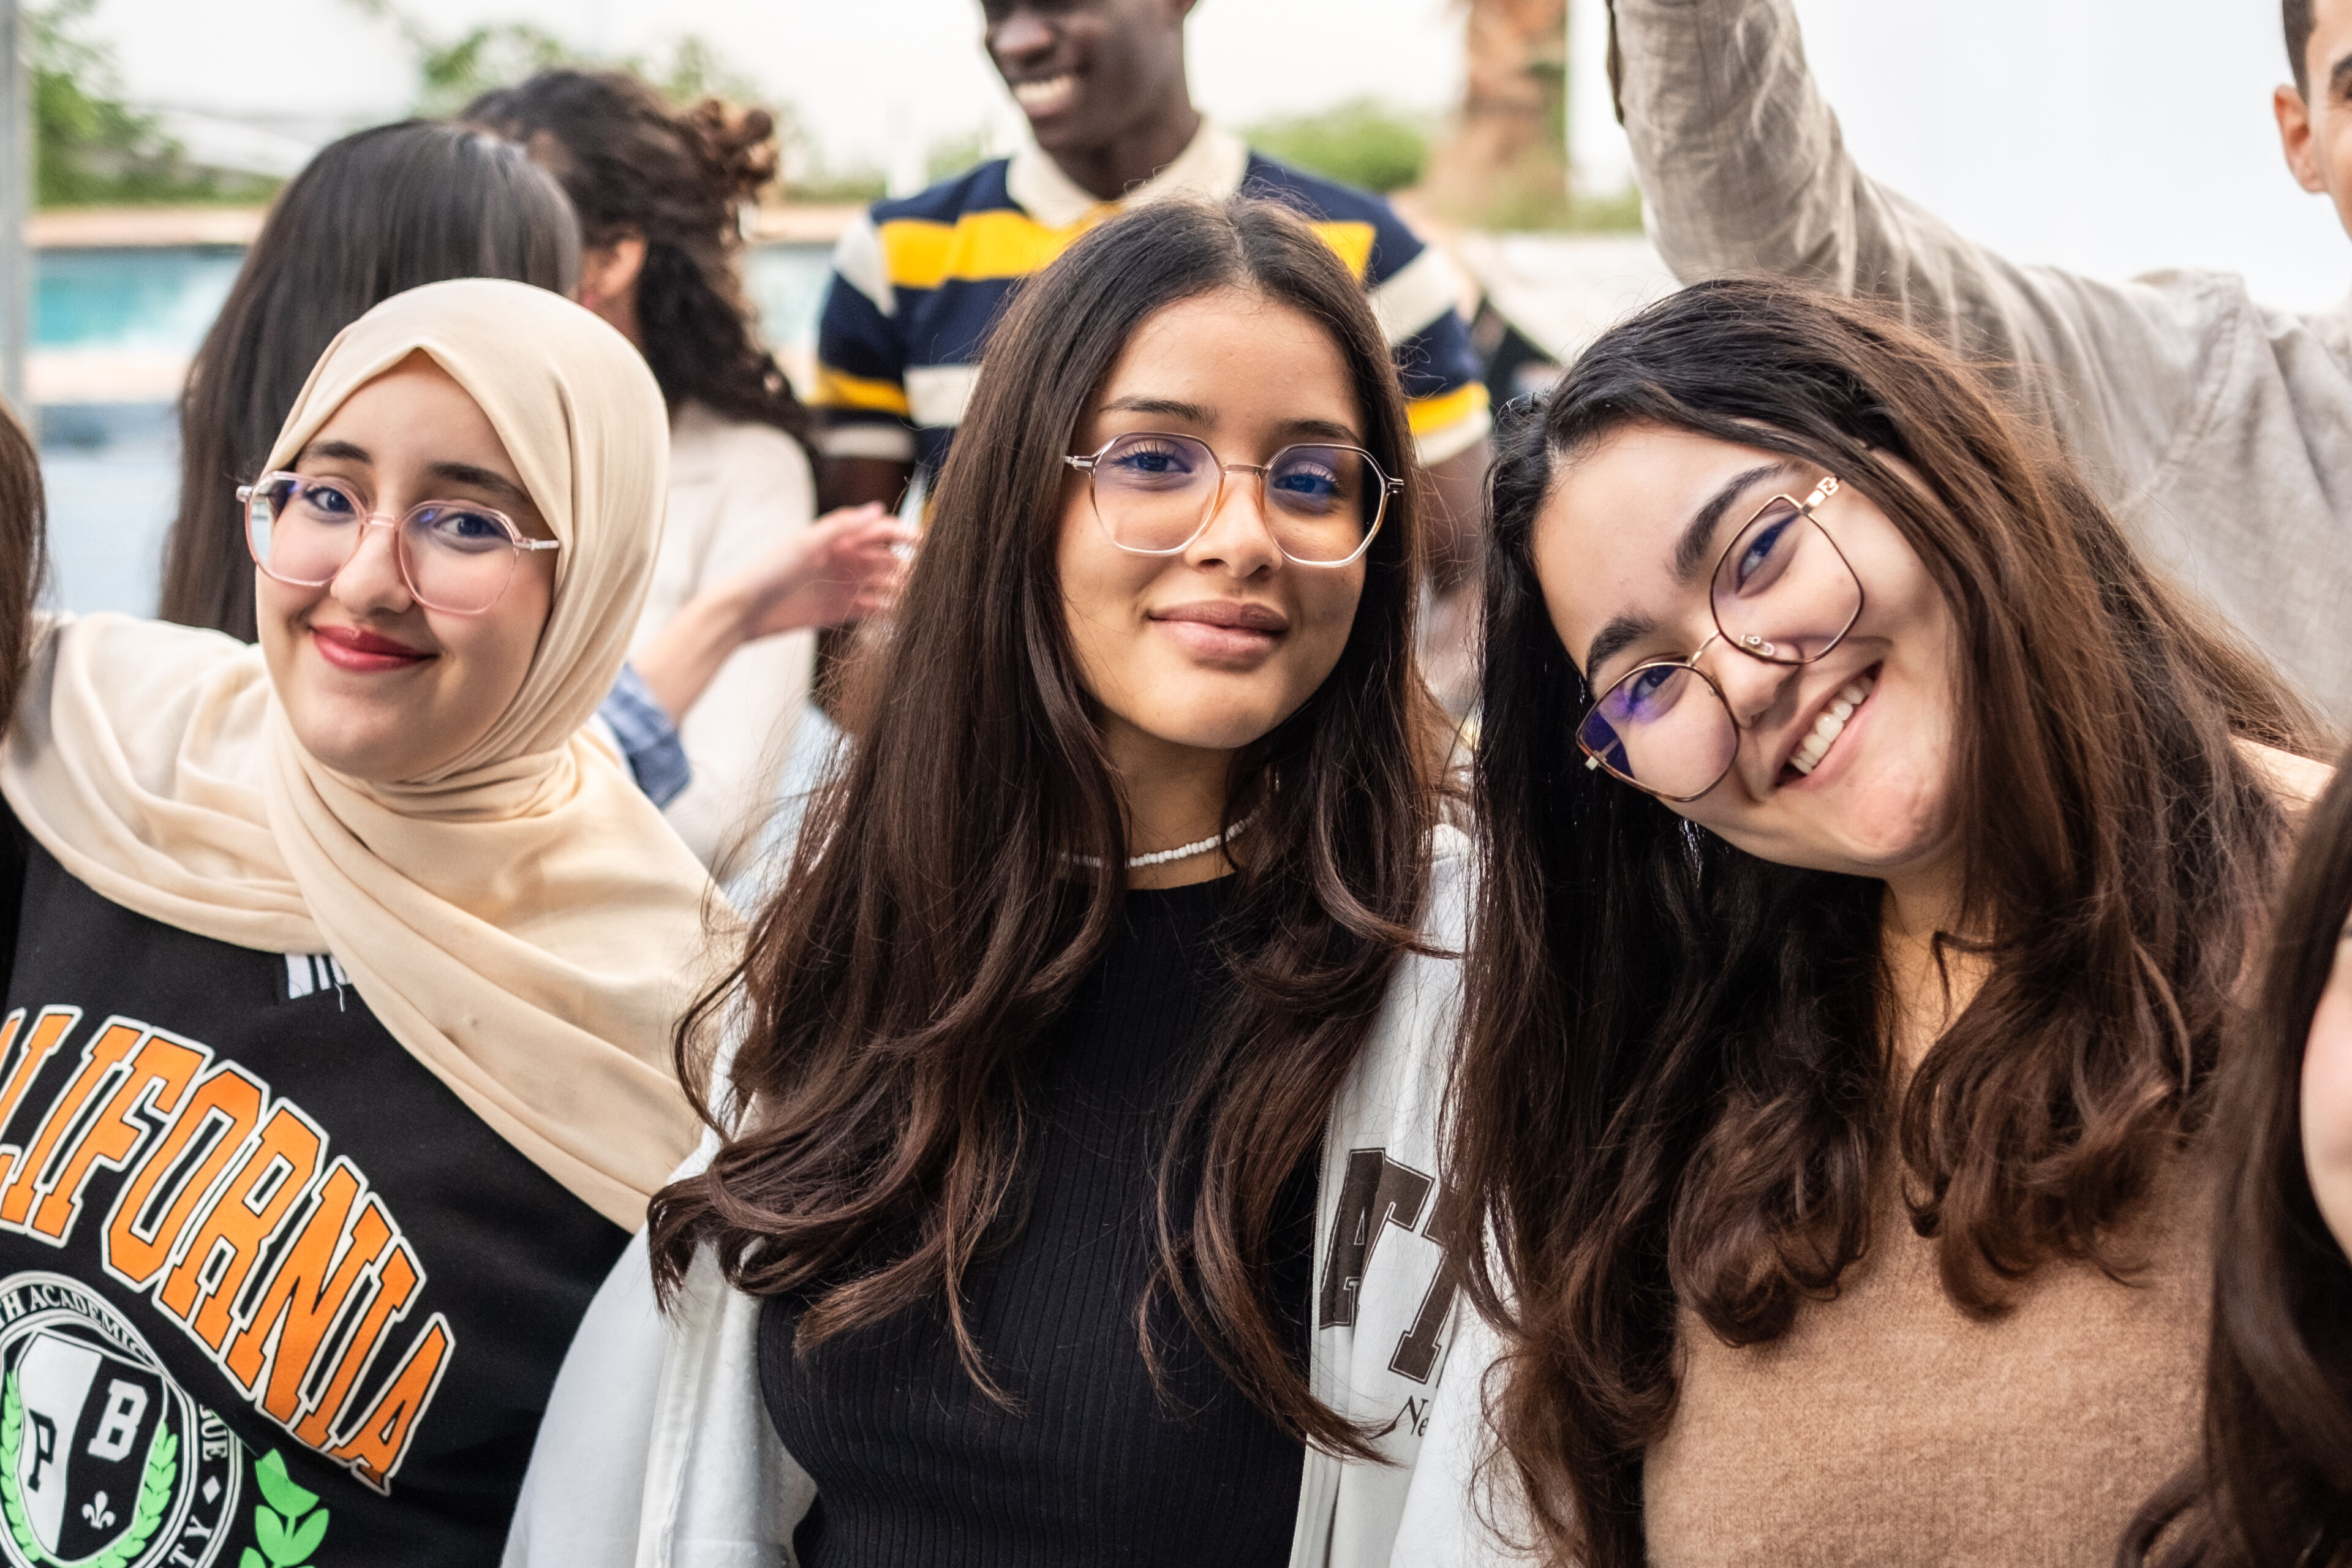 Three smiling young women at an outdoor gathering, with one wearing a hijab.